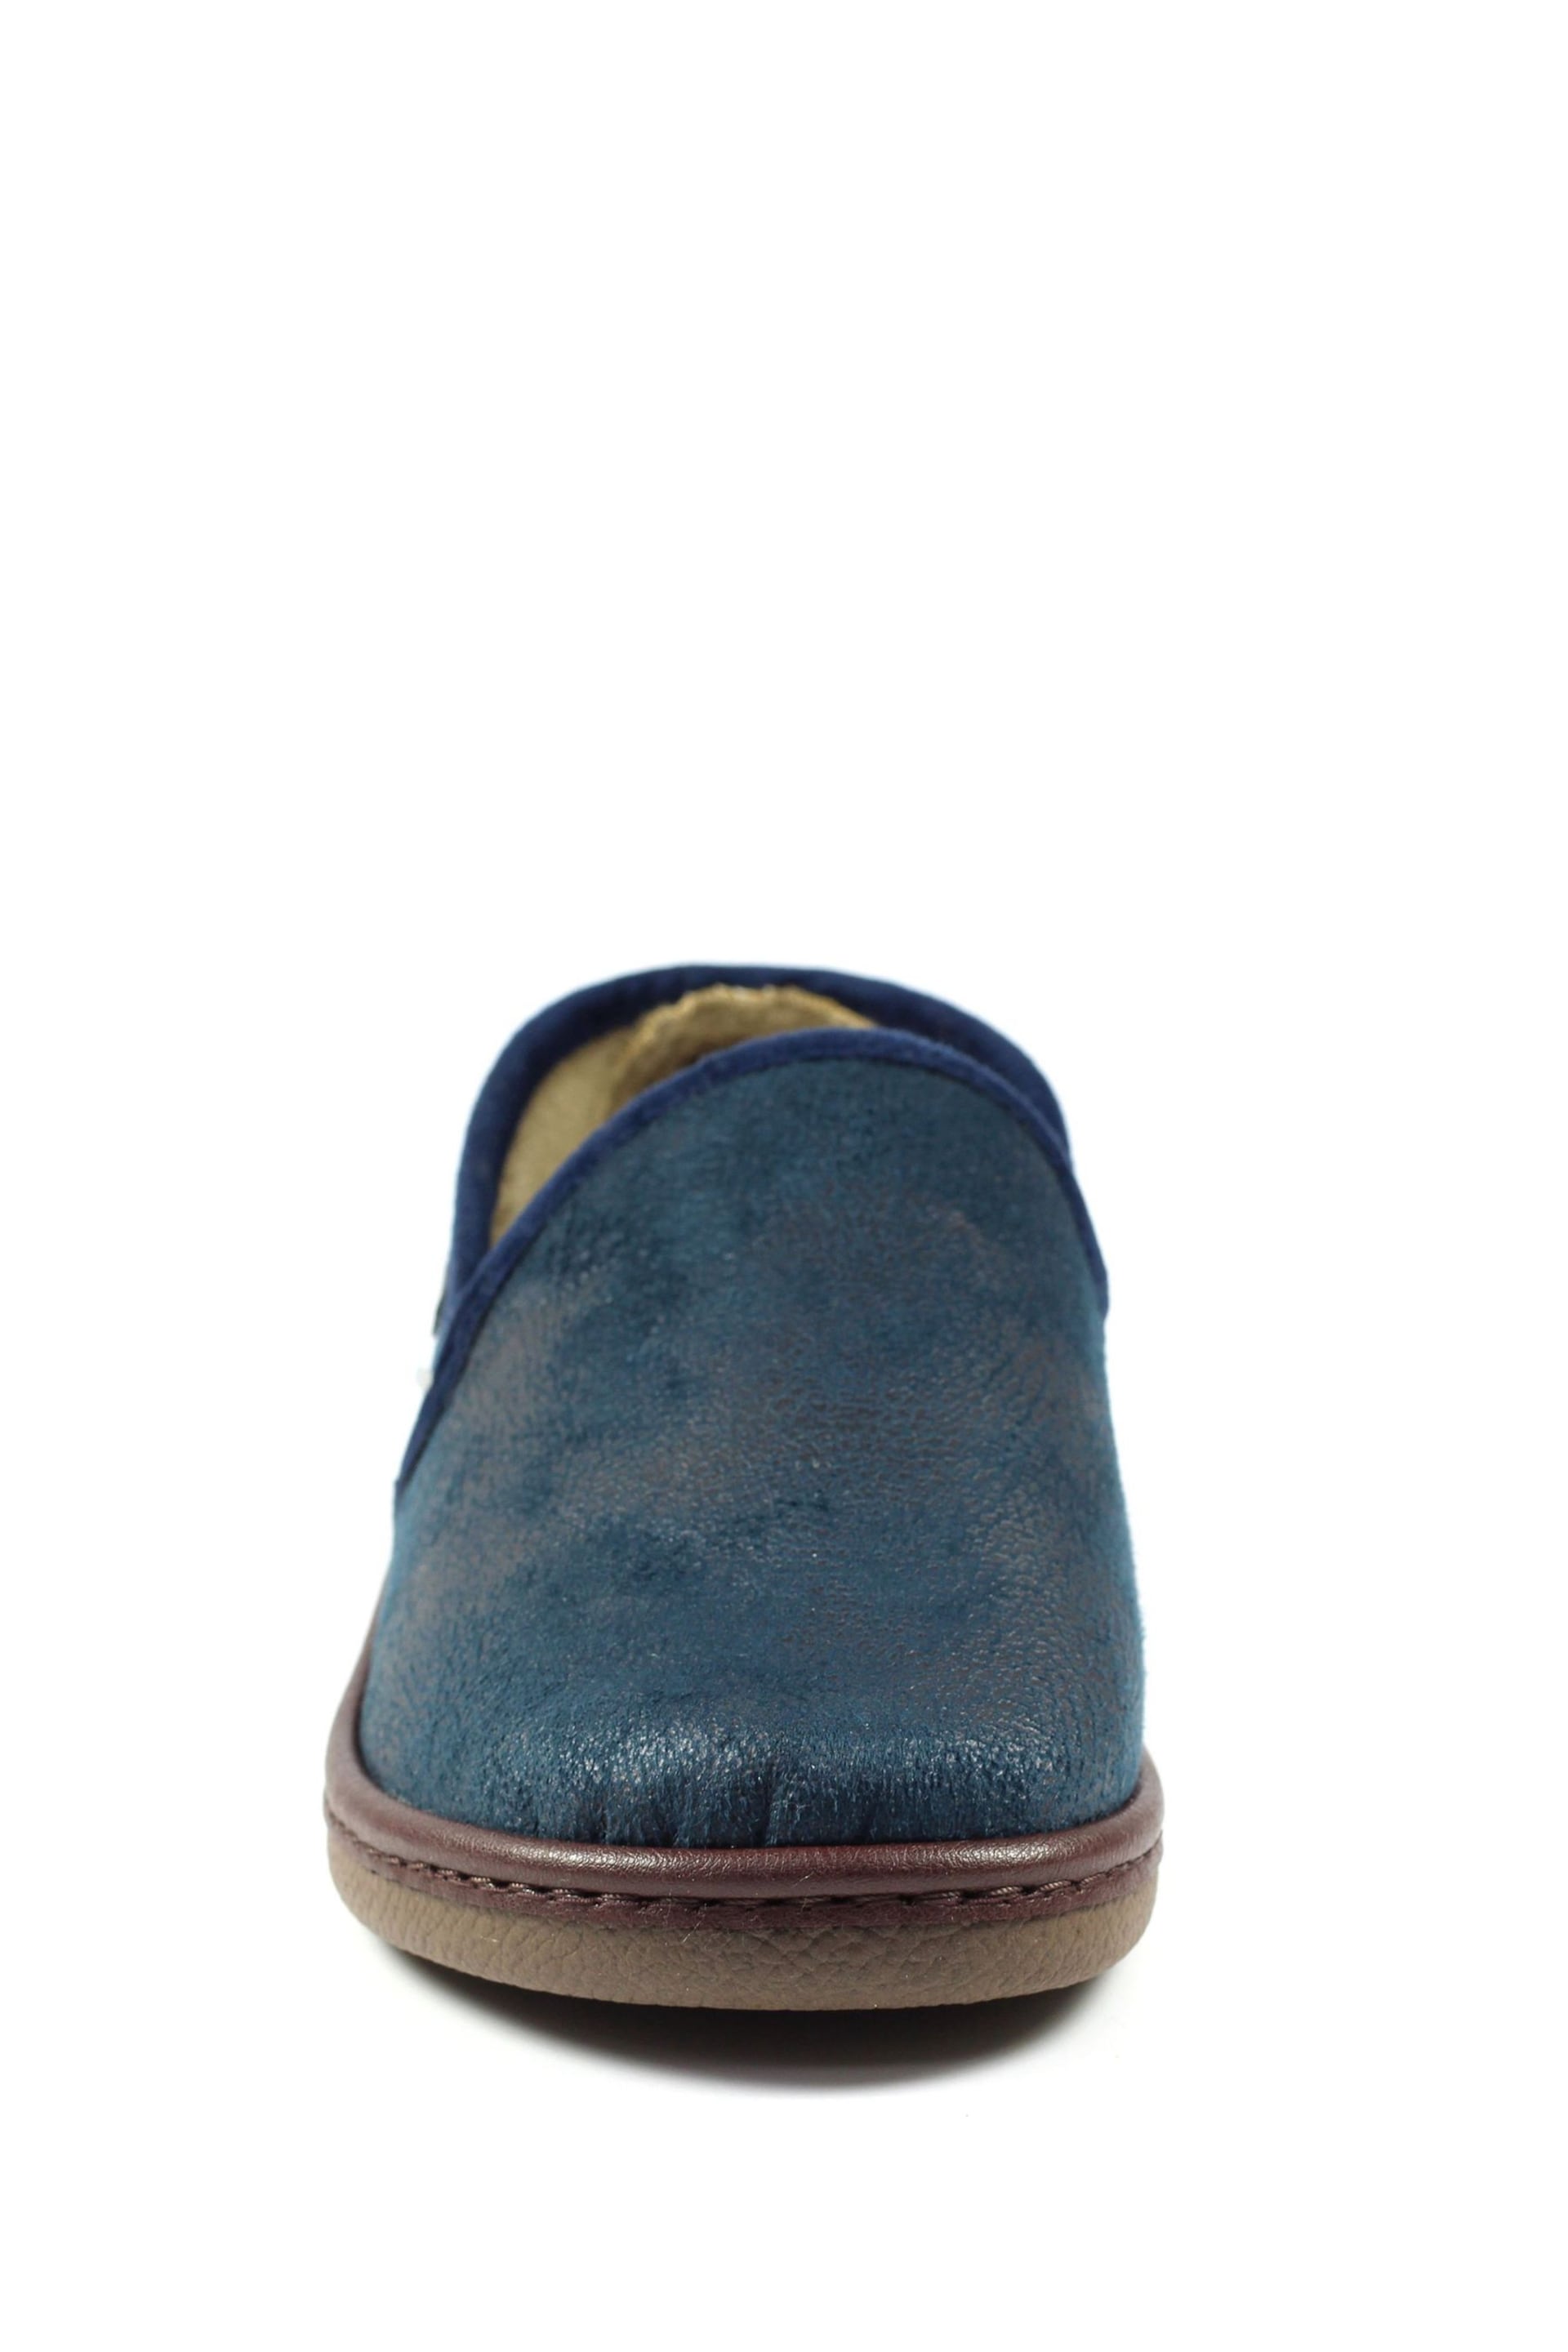 Goodyear Blue Manor Blue Full Slippers - Image 4 of 9